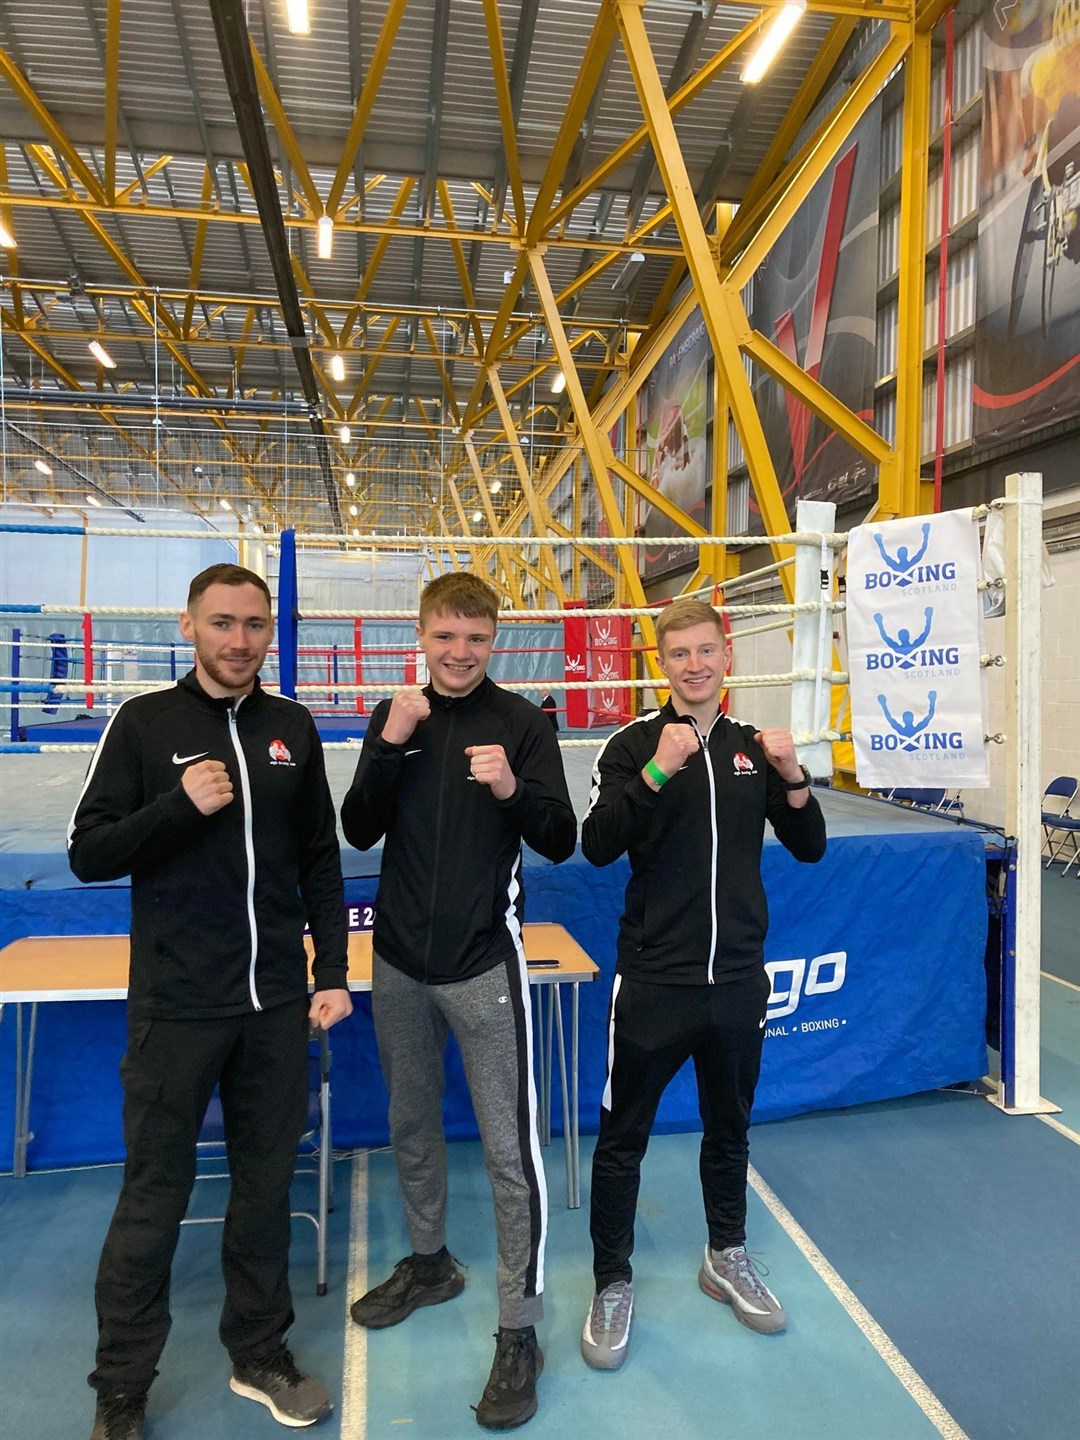 Arran Devine, Corey Rizza and Fraser Edwards before their Scottish open championship bouts